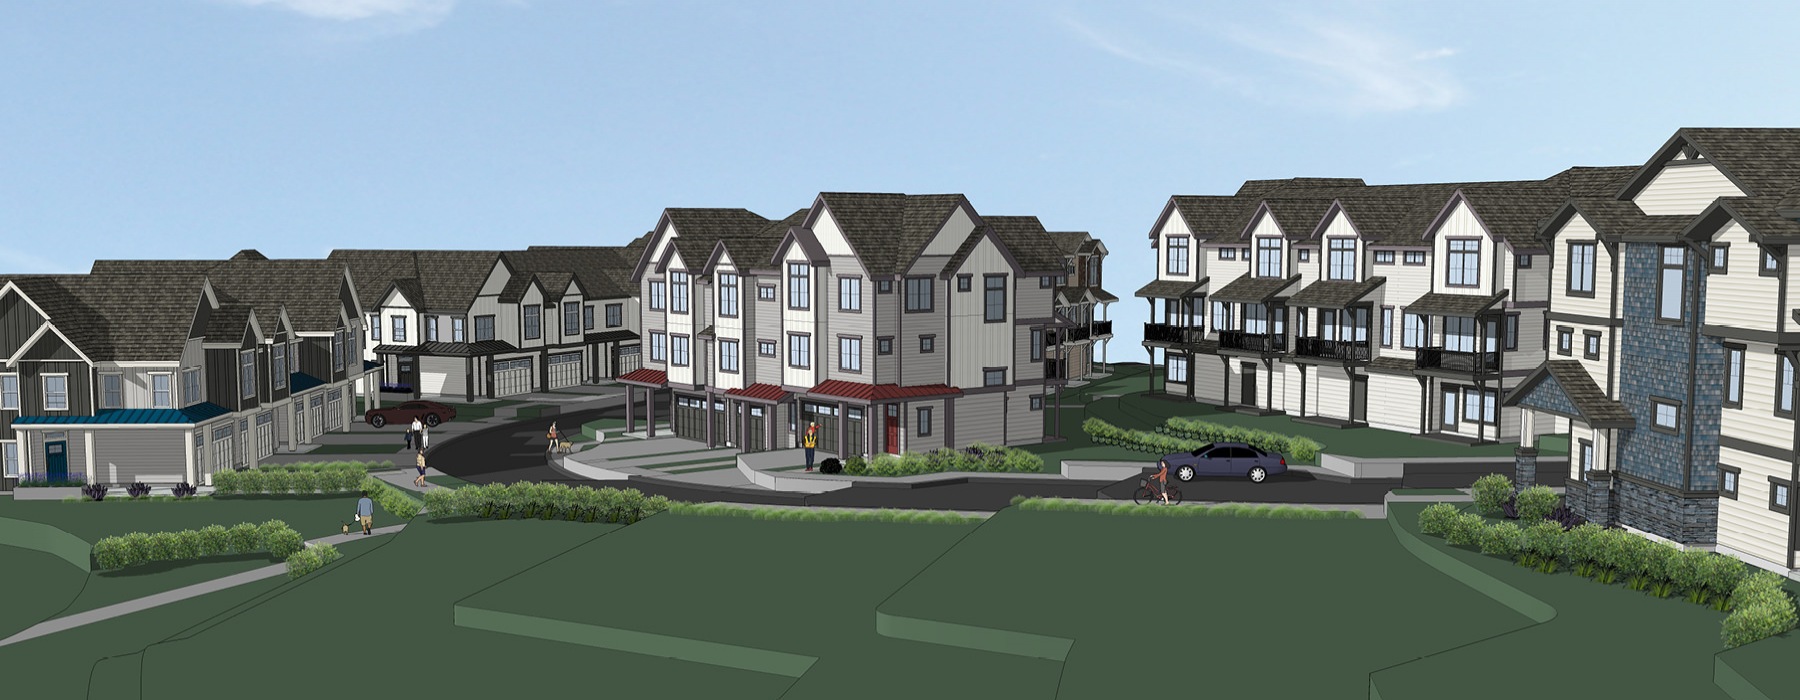 Rendering of Duvall Village Townhomes